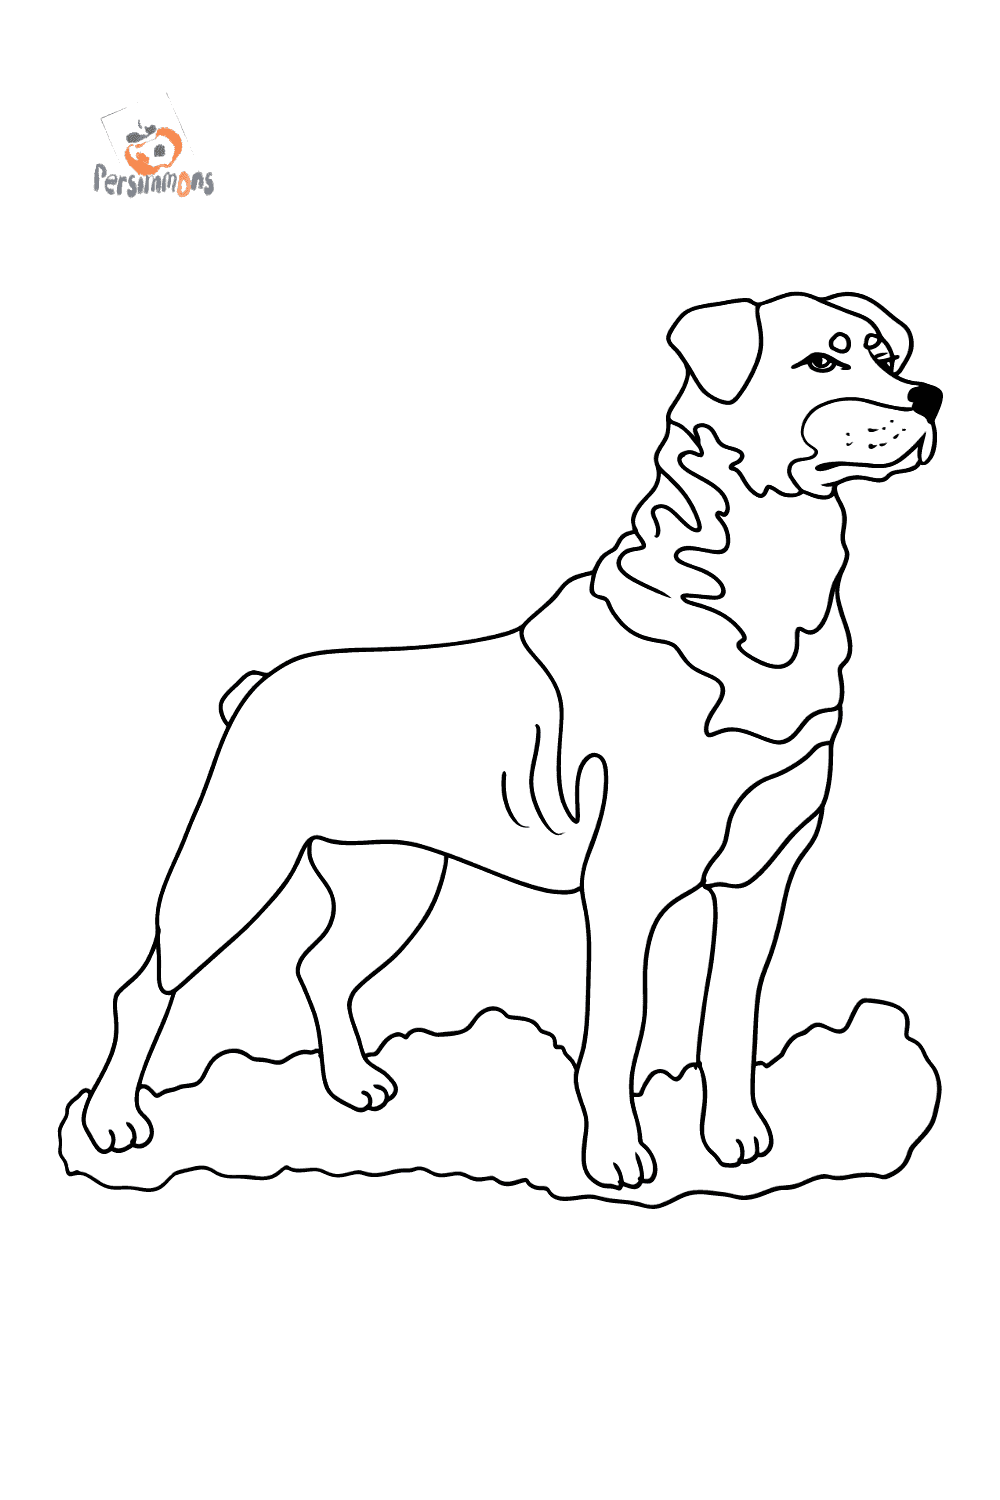 Rottweiler coloring page â free online